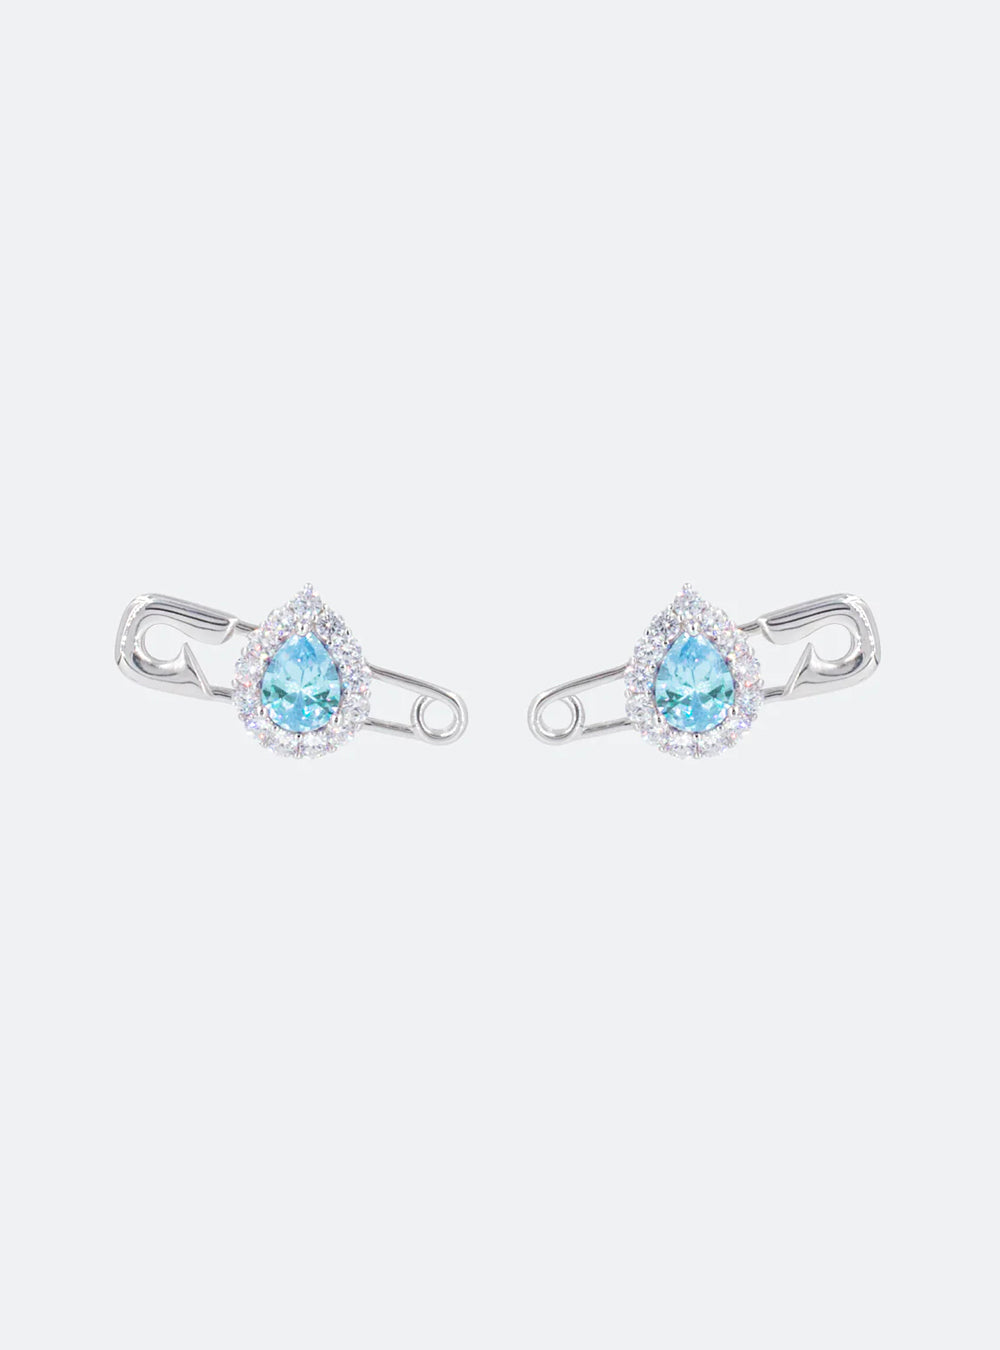 A pair of MIDNIGHTFACTORY Cocktail safety-pin earrings with blue topaz and diamonds.